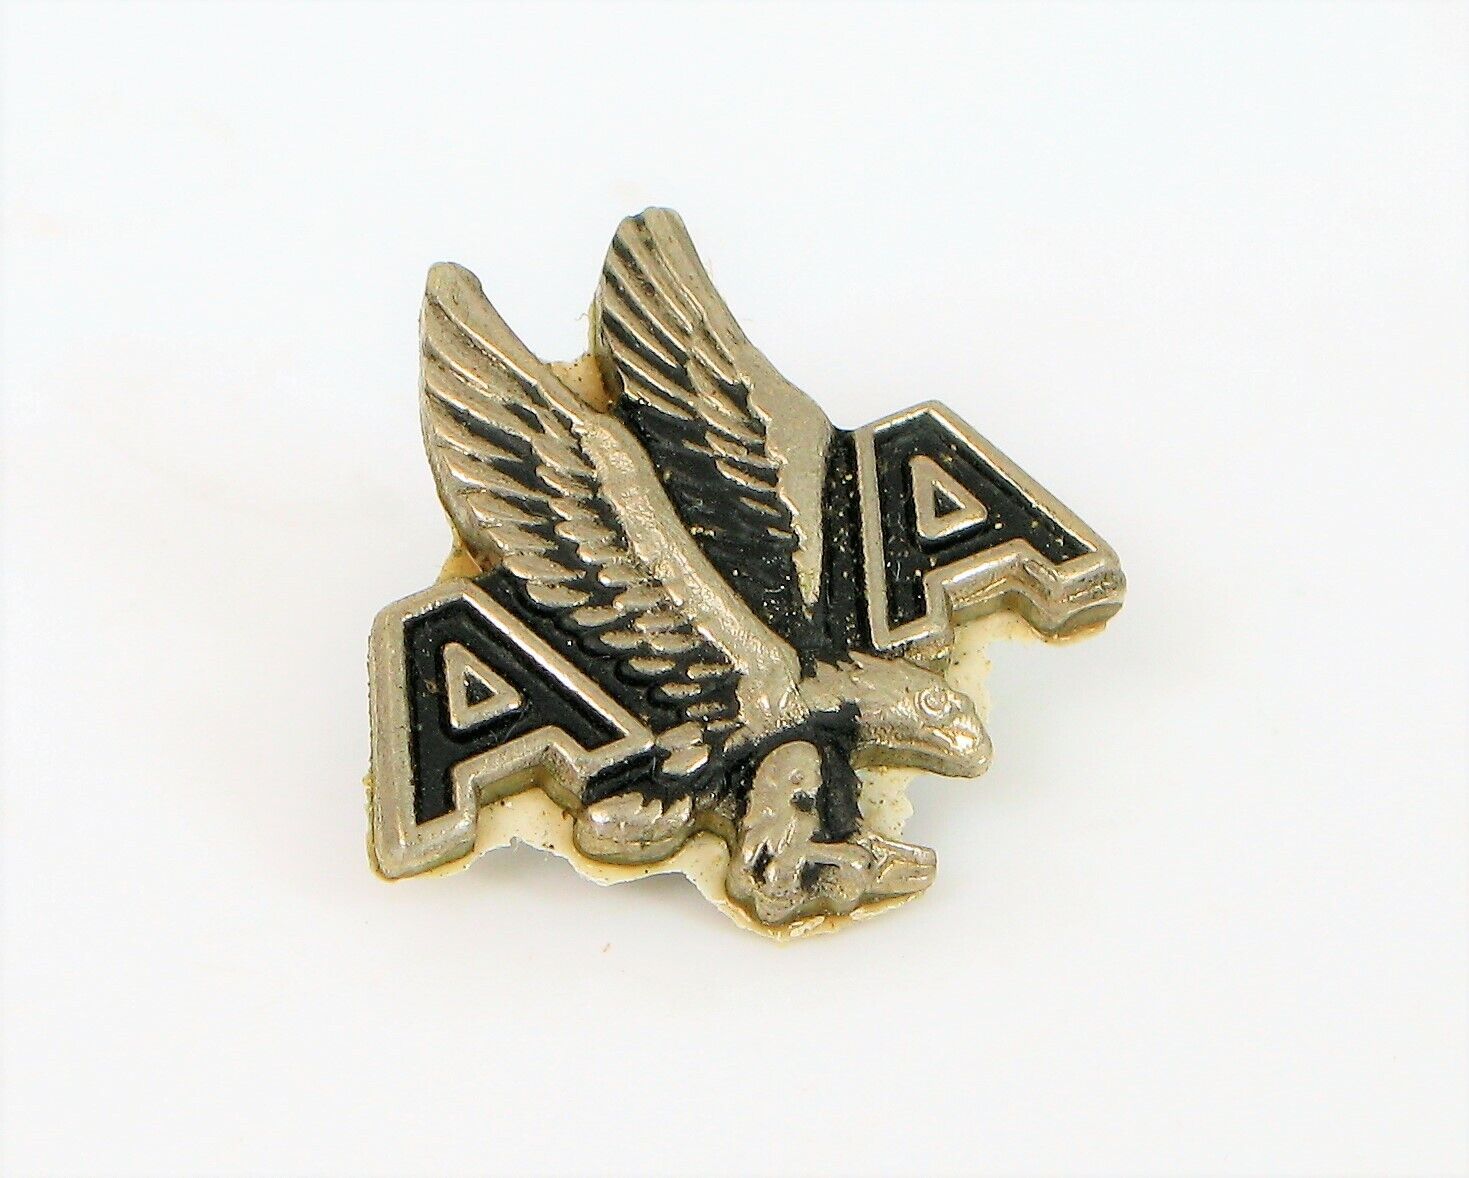 VINTAGE AMERICAN AIRLINES EMPLOYEE AWARD FLYING EAGLE EMBLEM SILVER TONE 1 YEAR